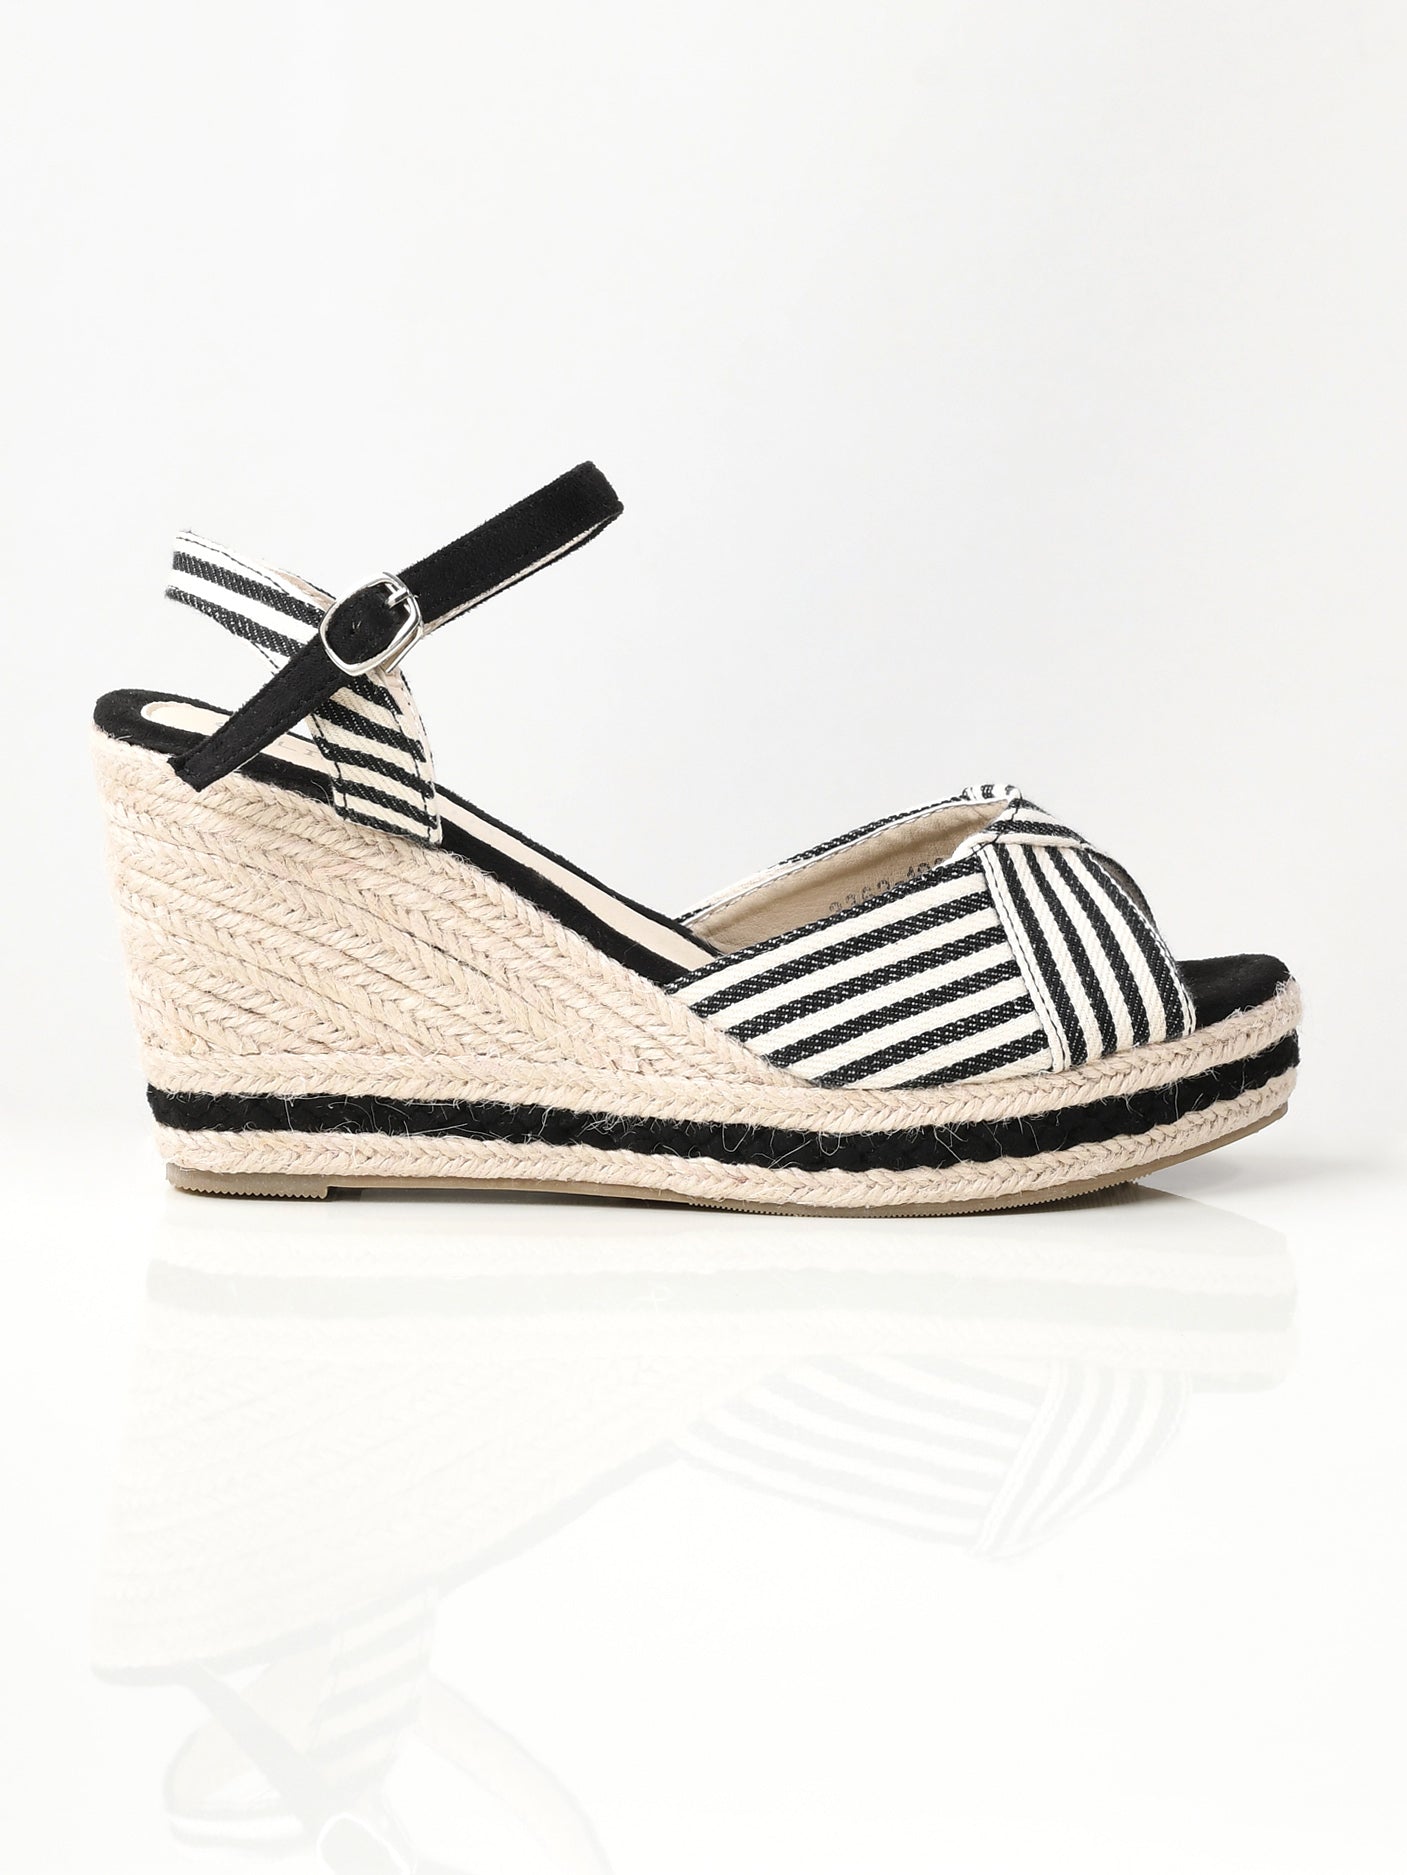 Striped Wedges - Black and White